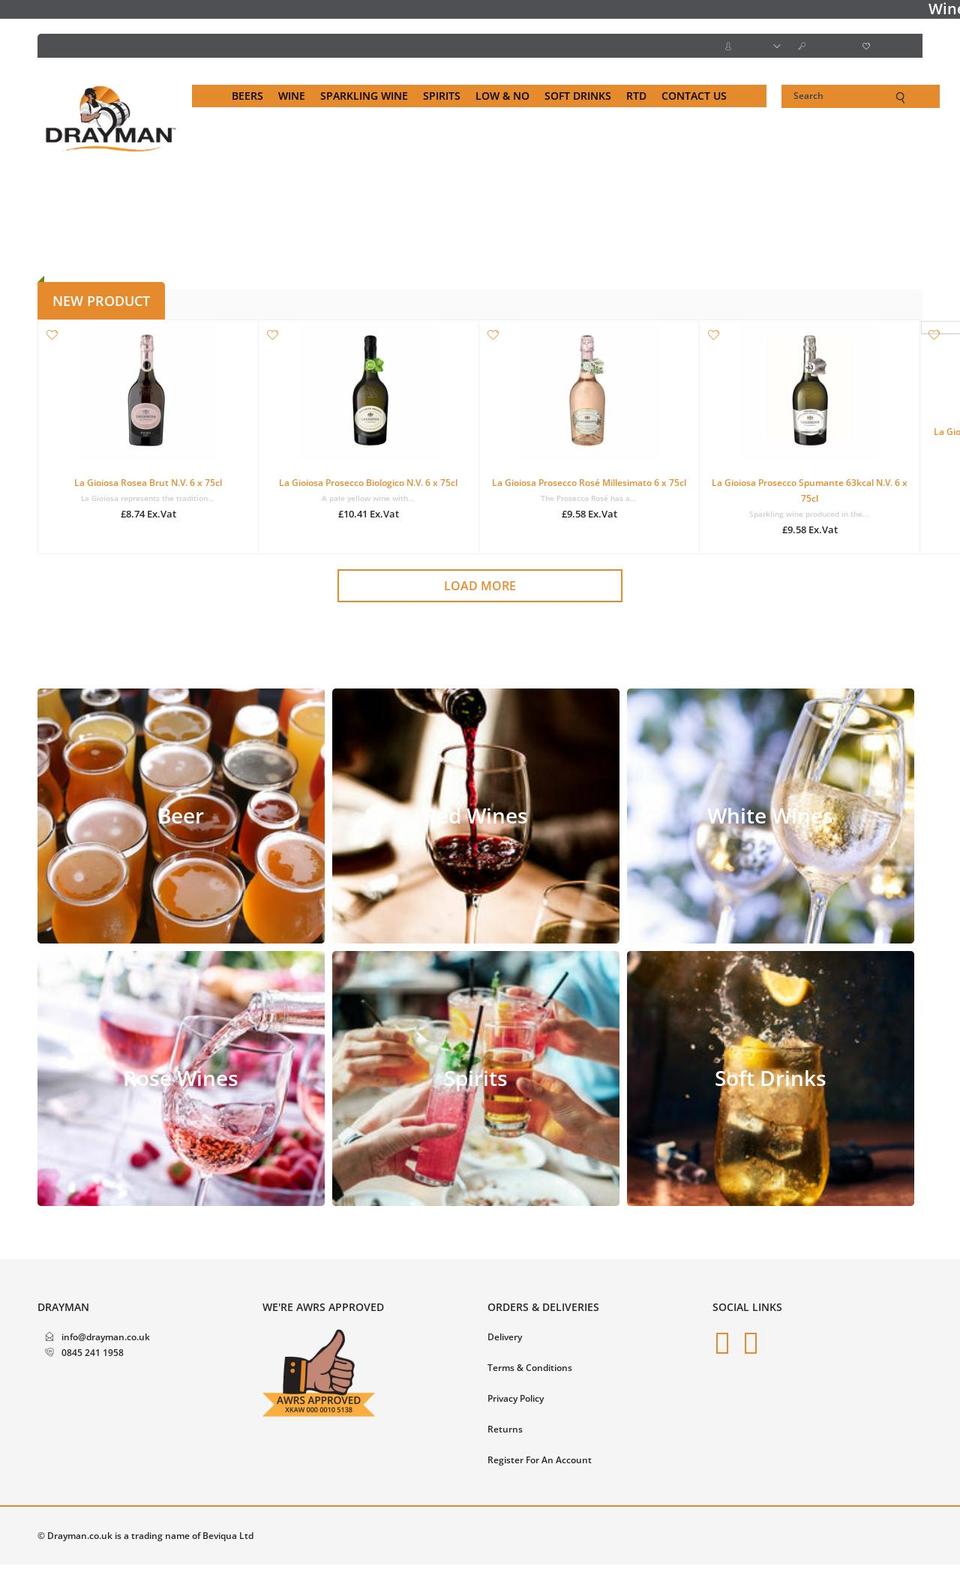 FASTEST Shopify theme site example drayman.co.uk